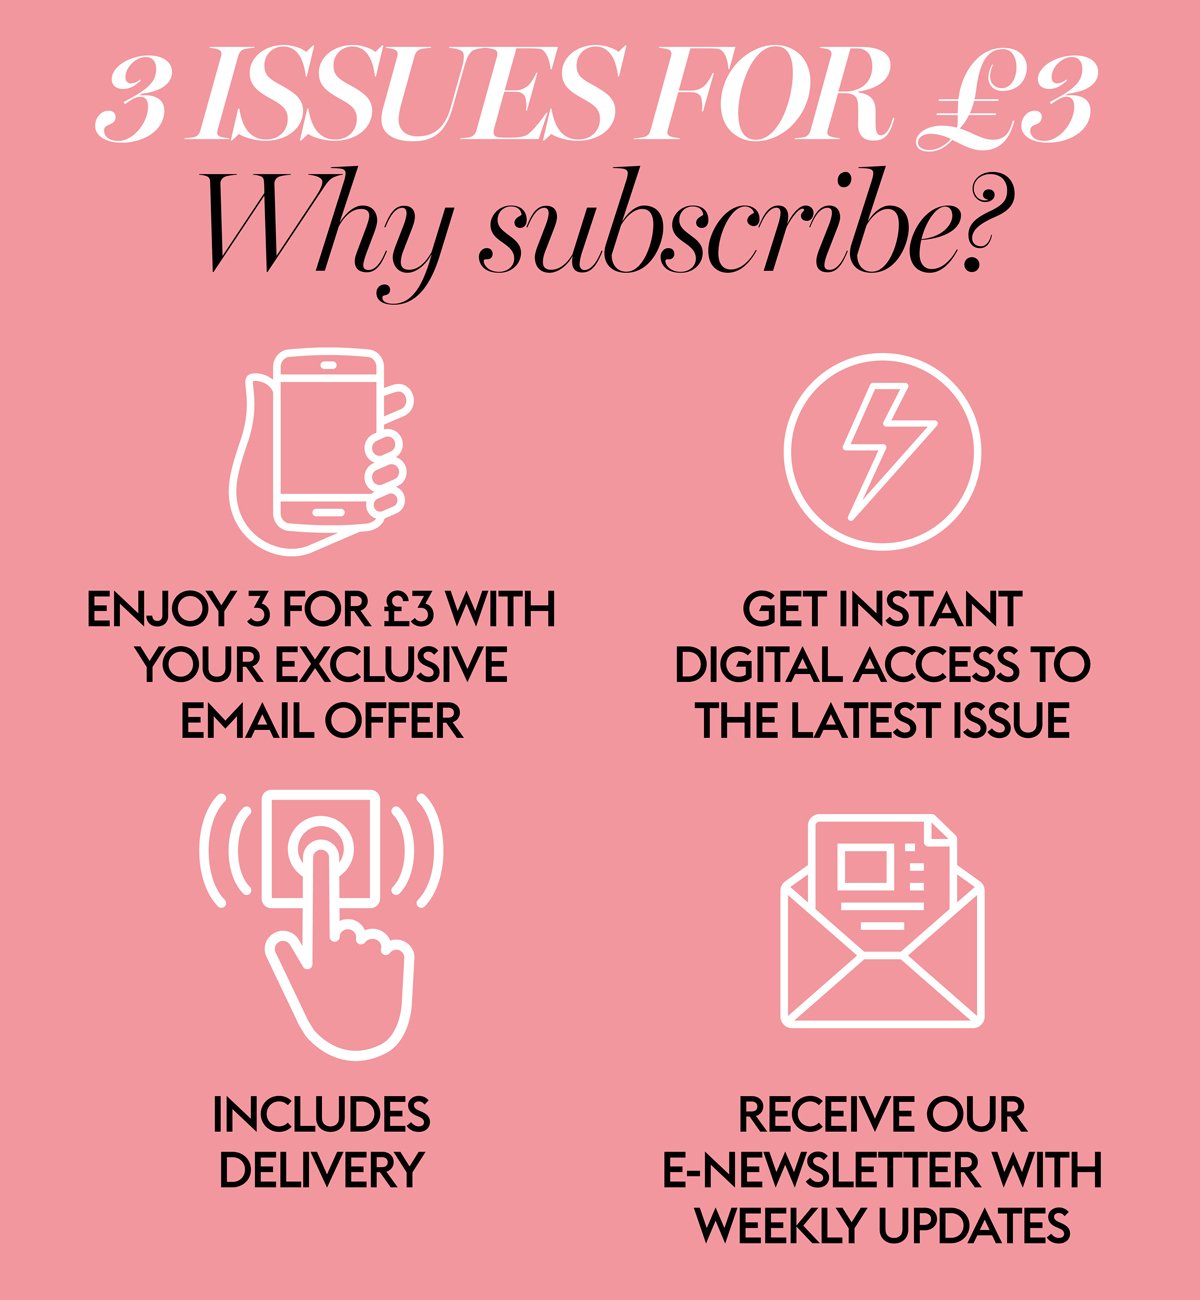 3 issues for £3 offer